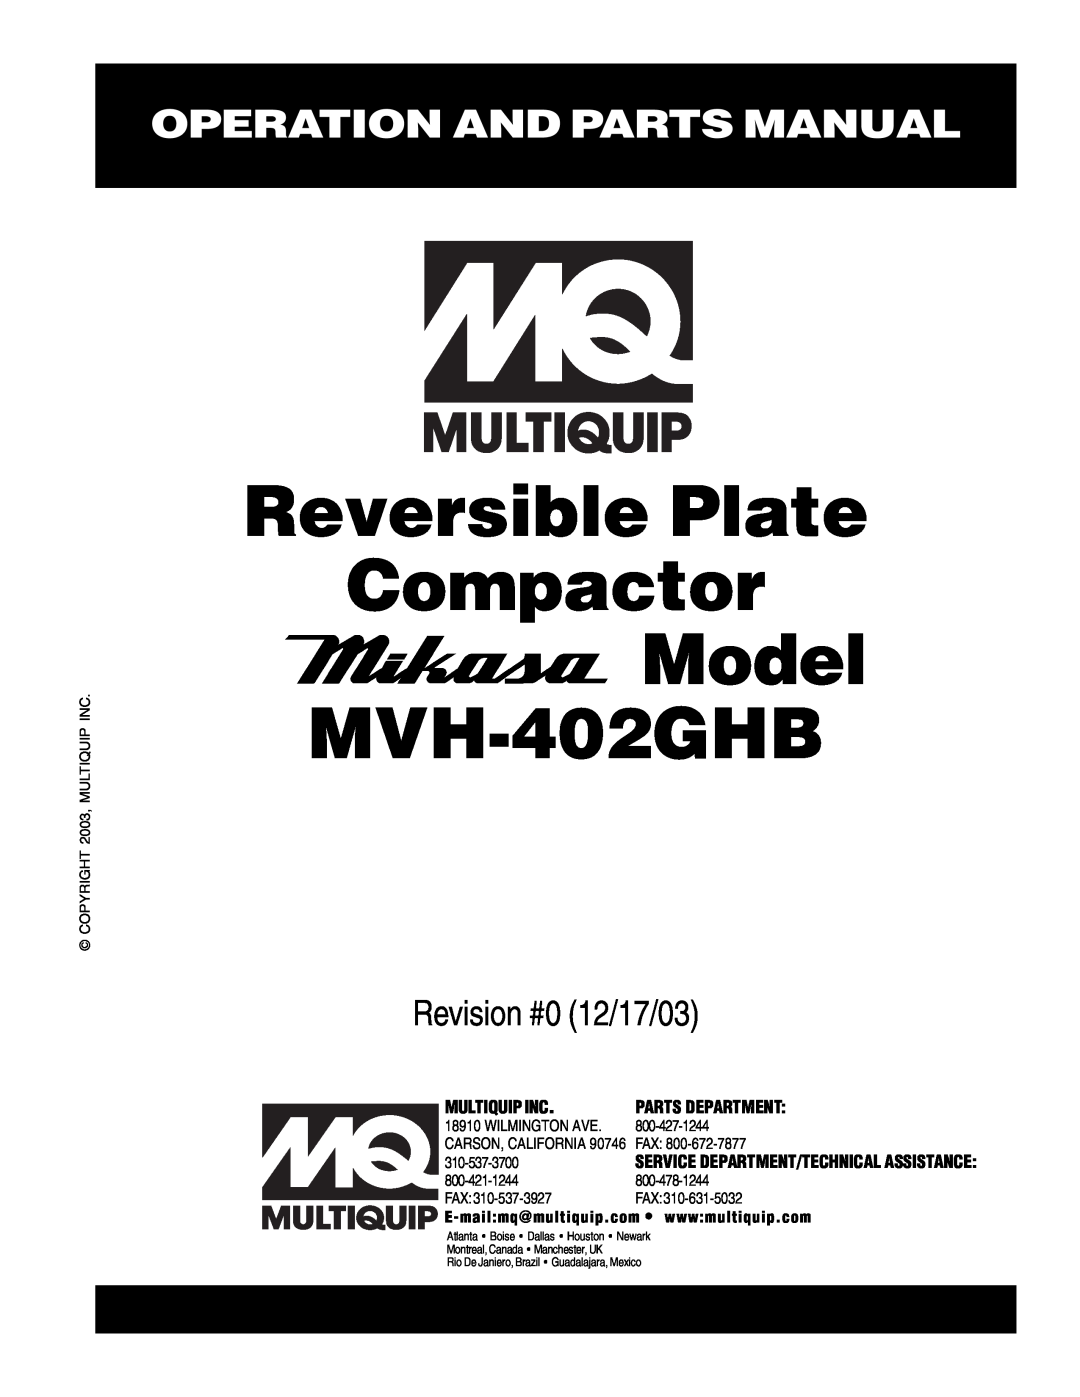 Multiquip manual Operation And Parts Manual, Reversible Plate Compactor Model MVH-402GHB, Revision #0 12/17/03 